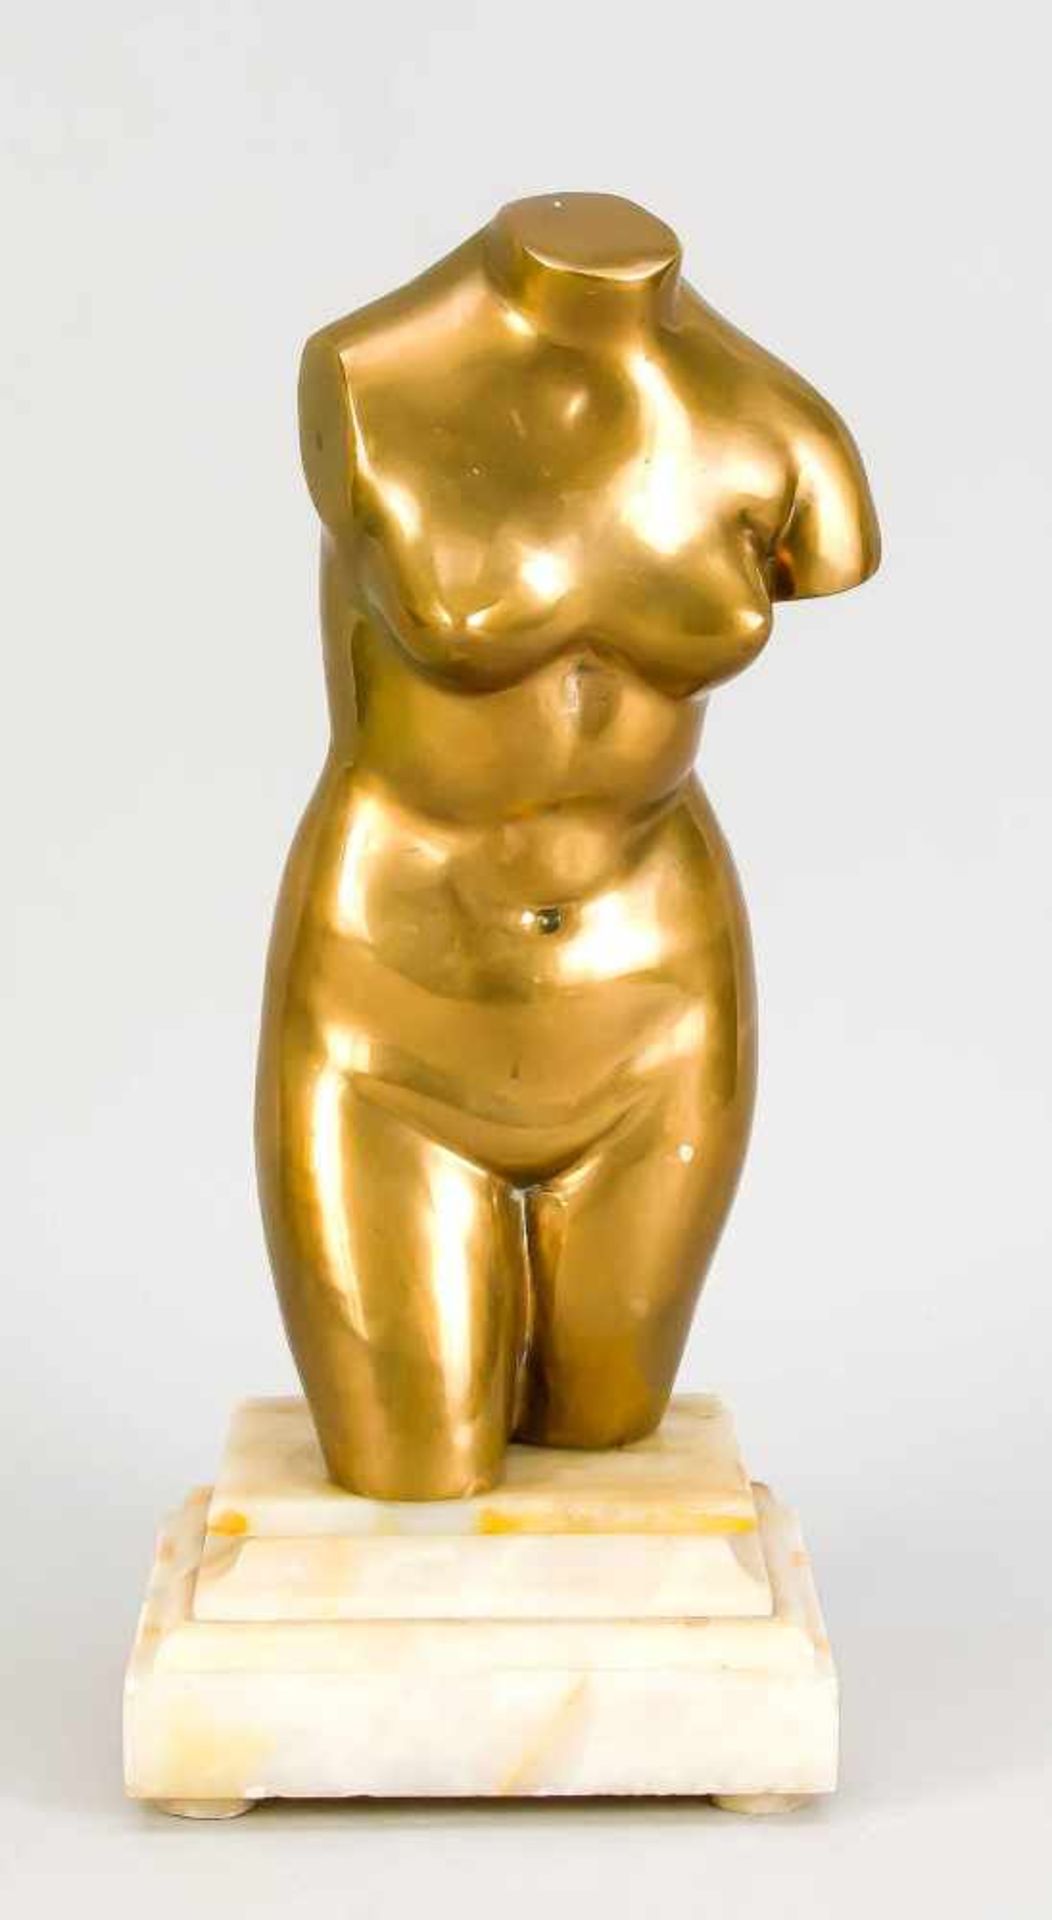 Torso of Venus, cast brass from the 20th century based on an antique model, on alabaster